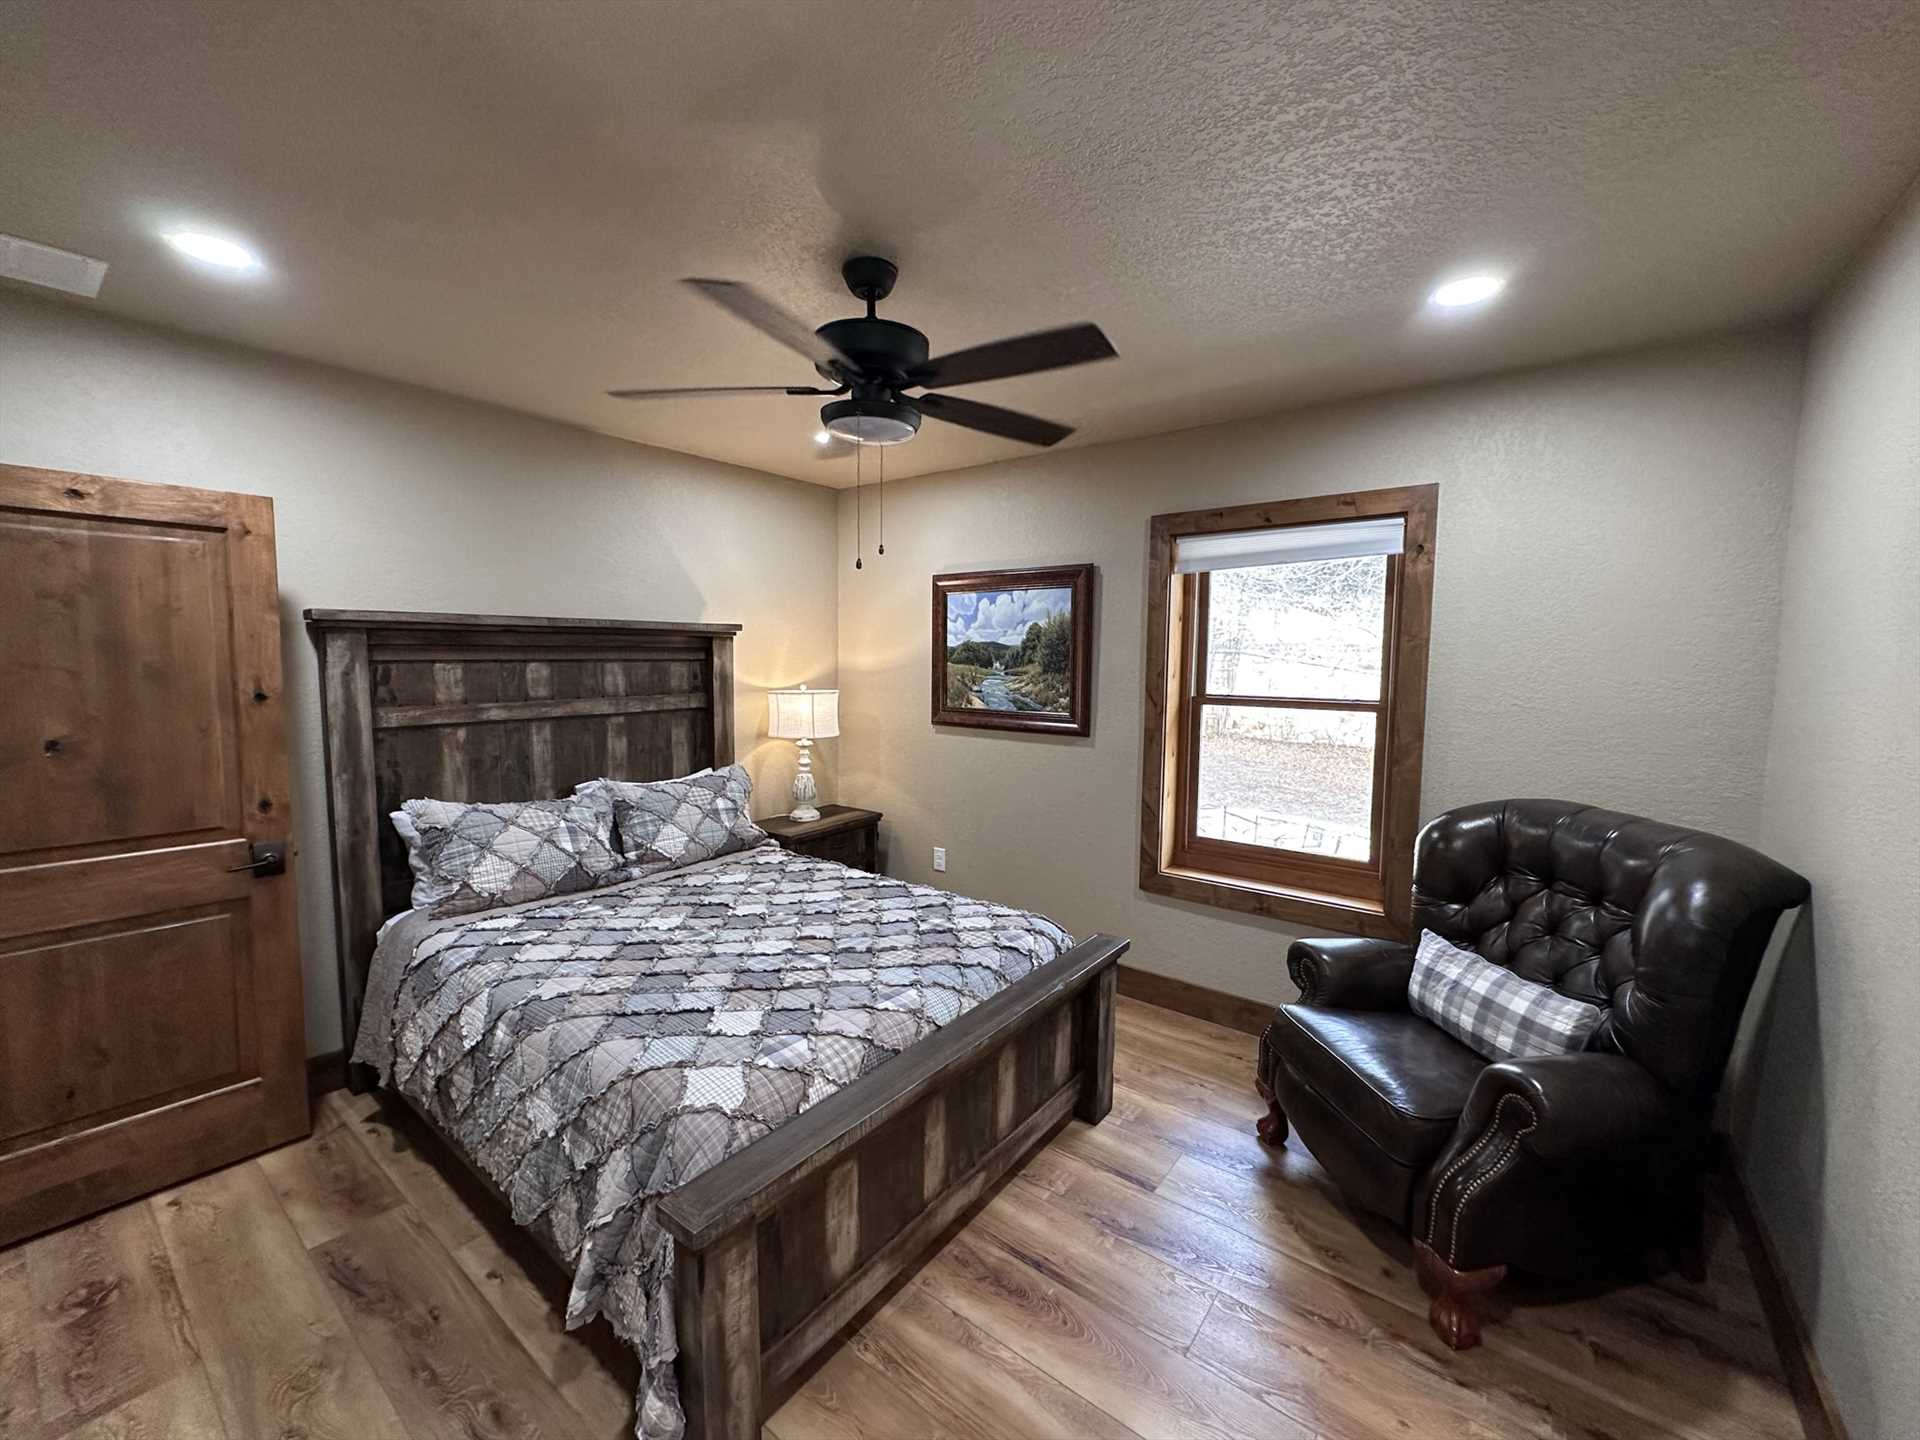                                                 Ceiling fans in all the bedrooms, combined with central air and heat that covers the whole Lodge, keep your sleeping environment just as you like it!